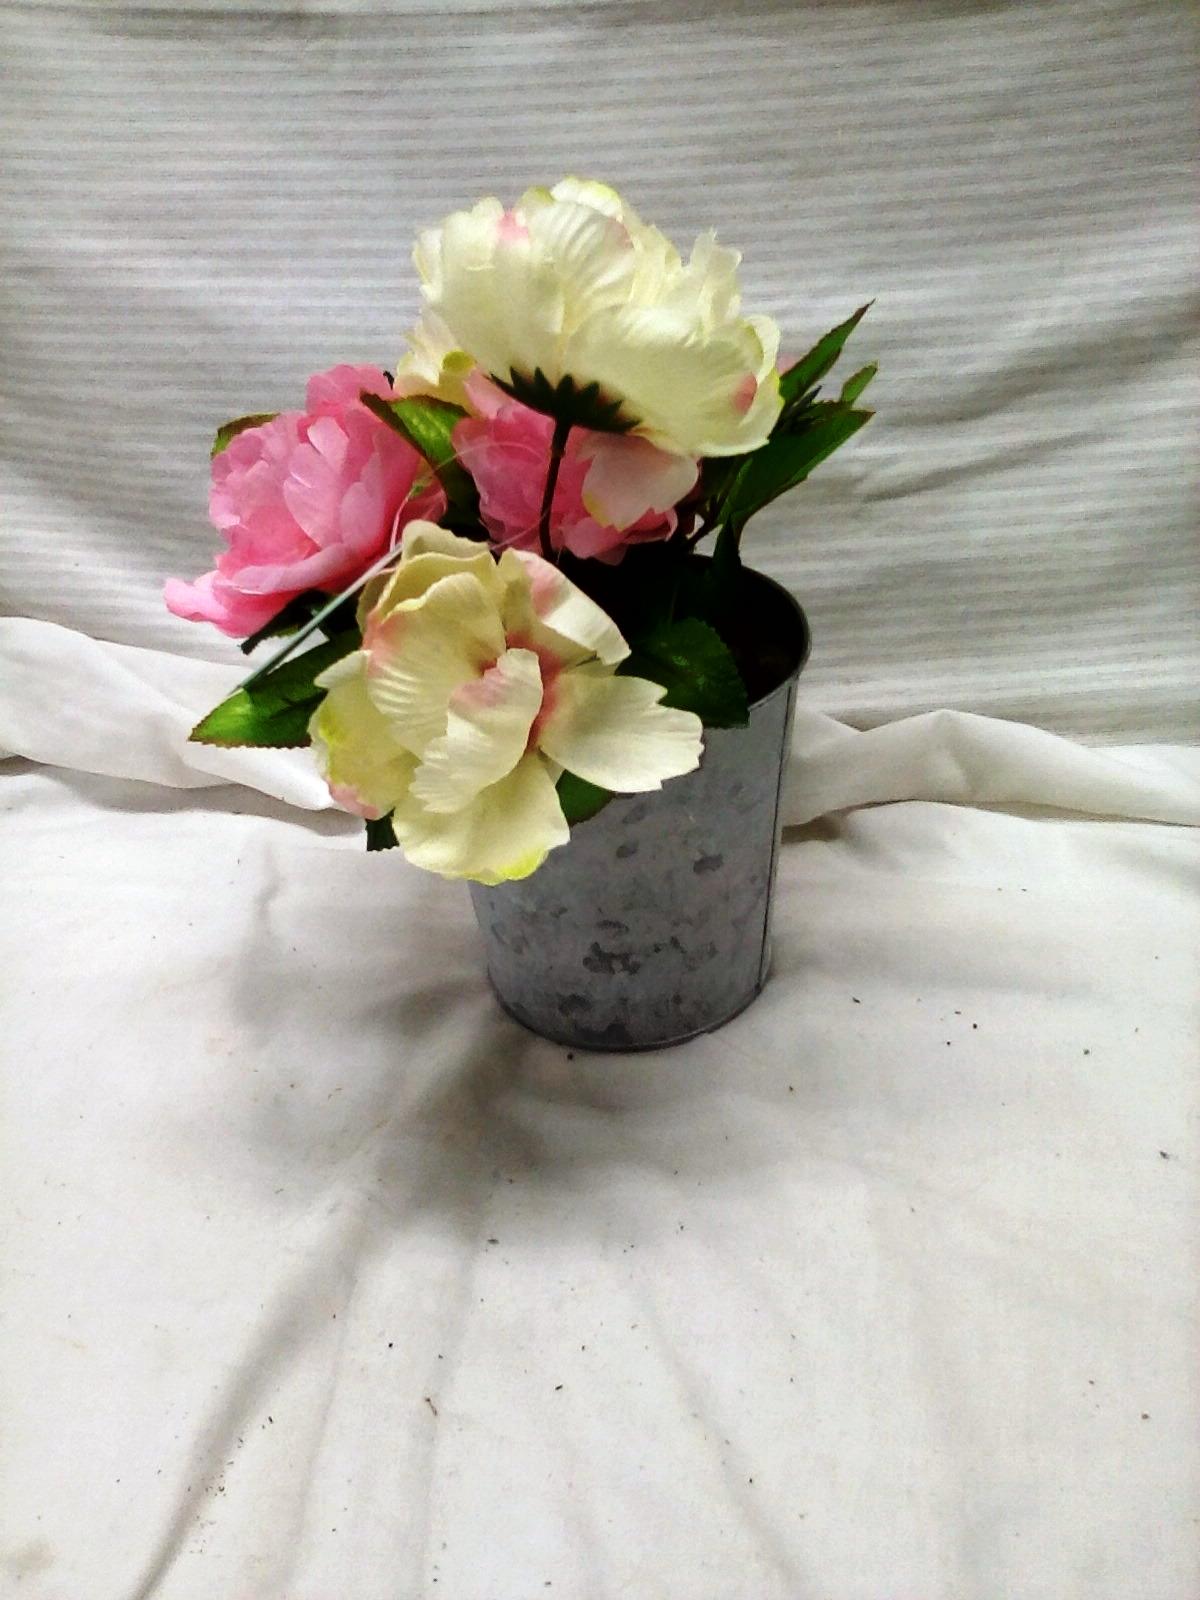 5" Galvanized Can of Artificial Flowers